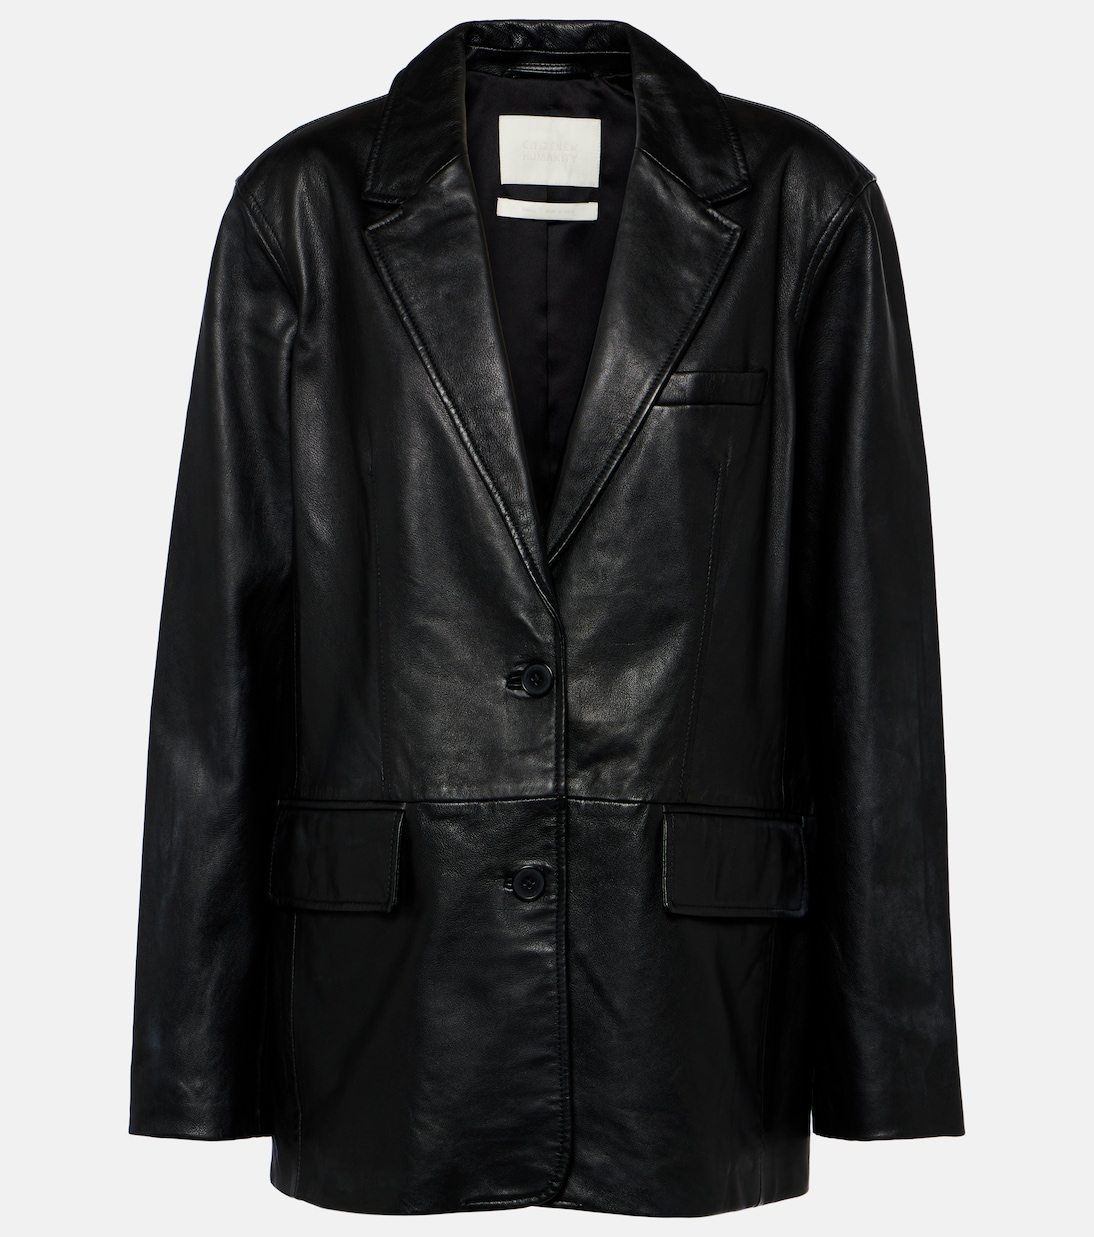 A black leather coat on a swinger Description automatically generated